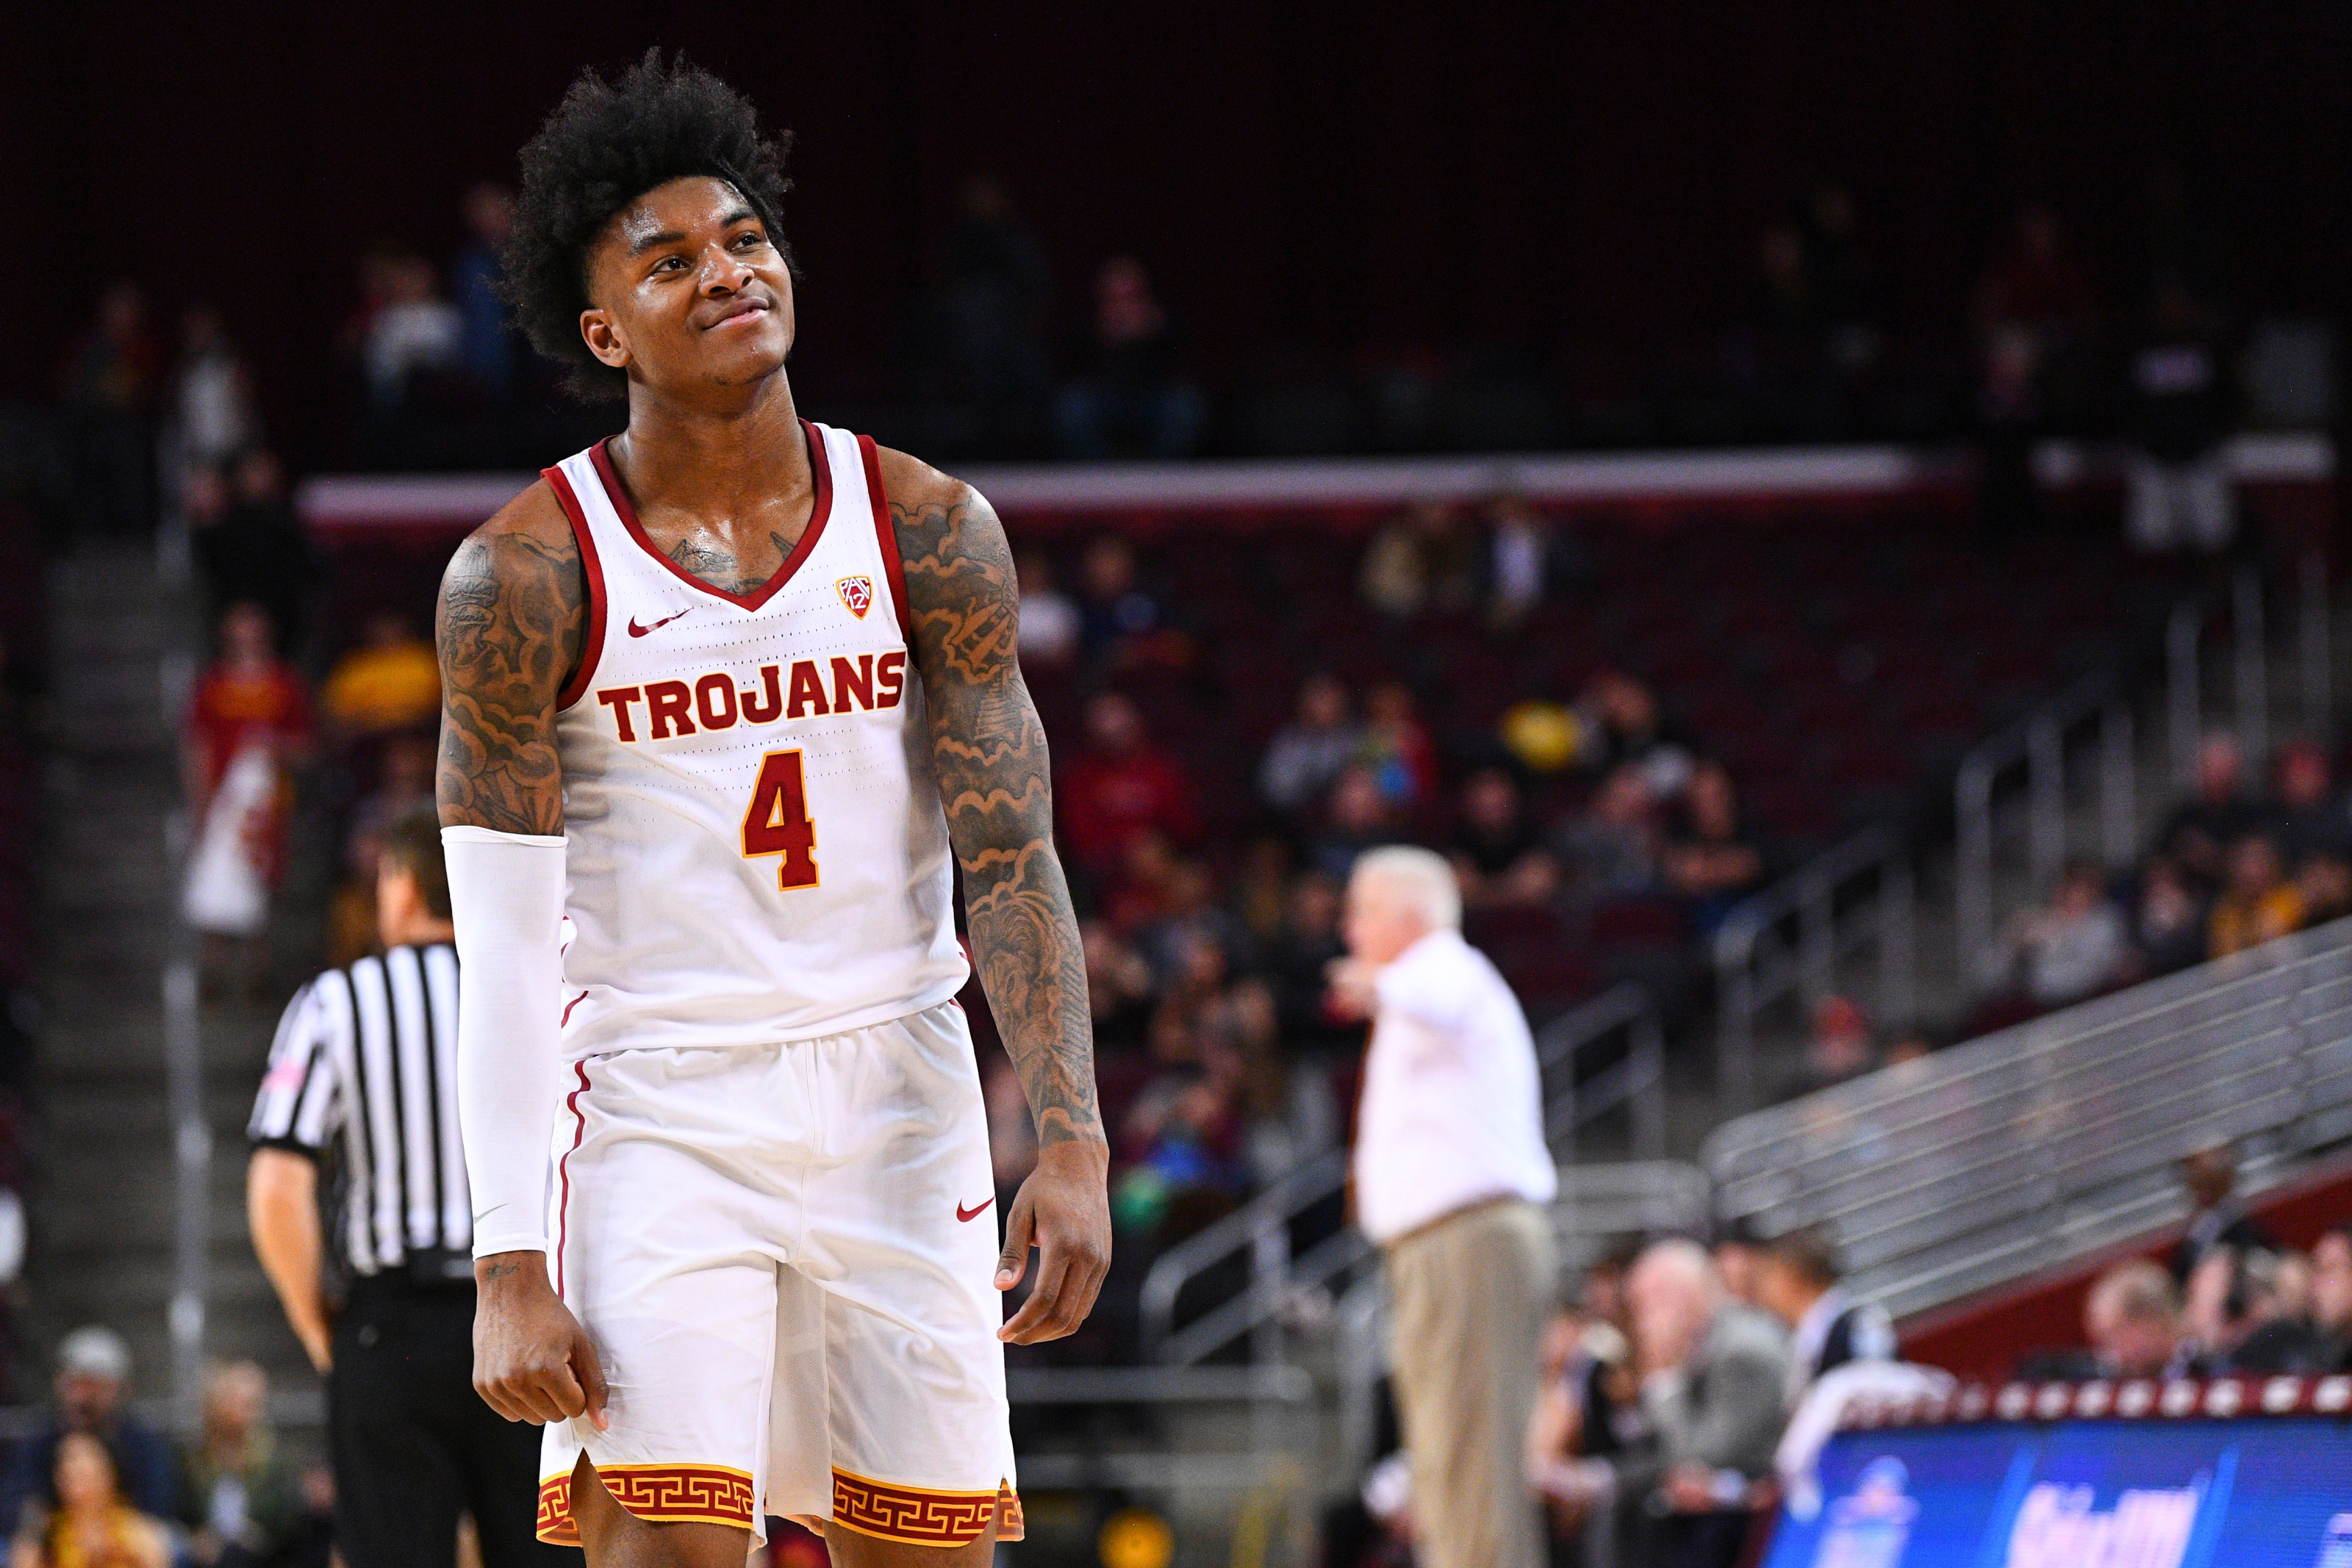 Iko] Kevin Porter Jr. ends the height controversy: “I'm 6'6. I'm 6